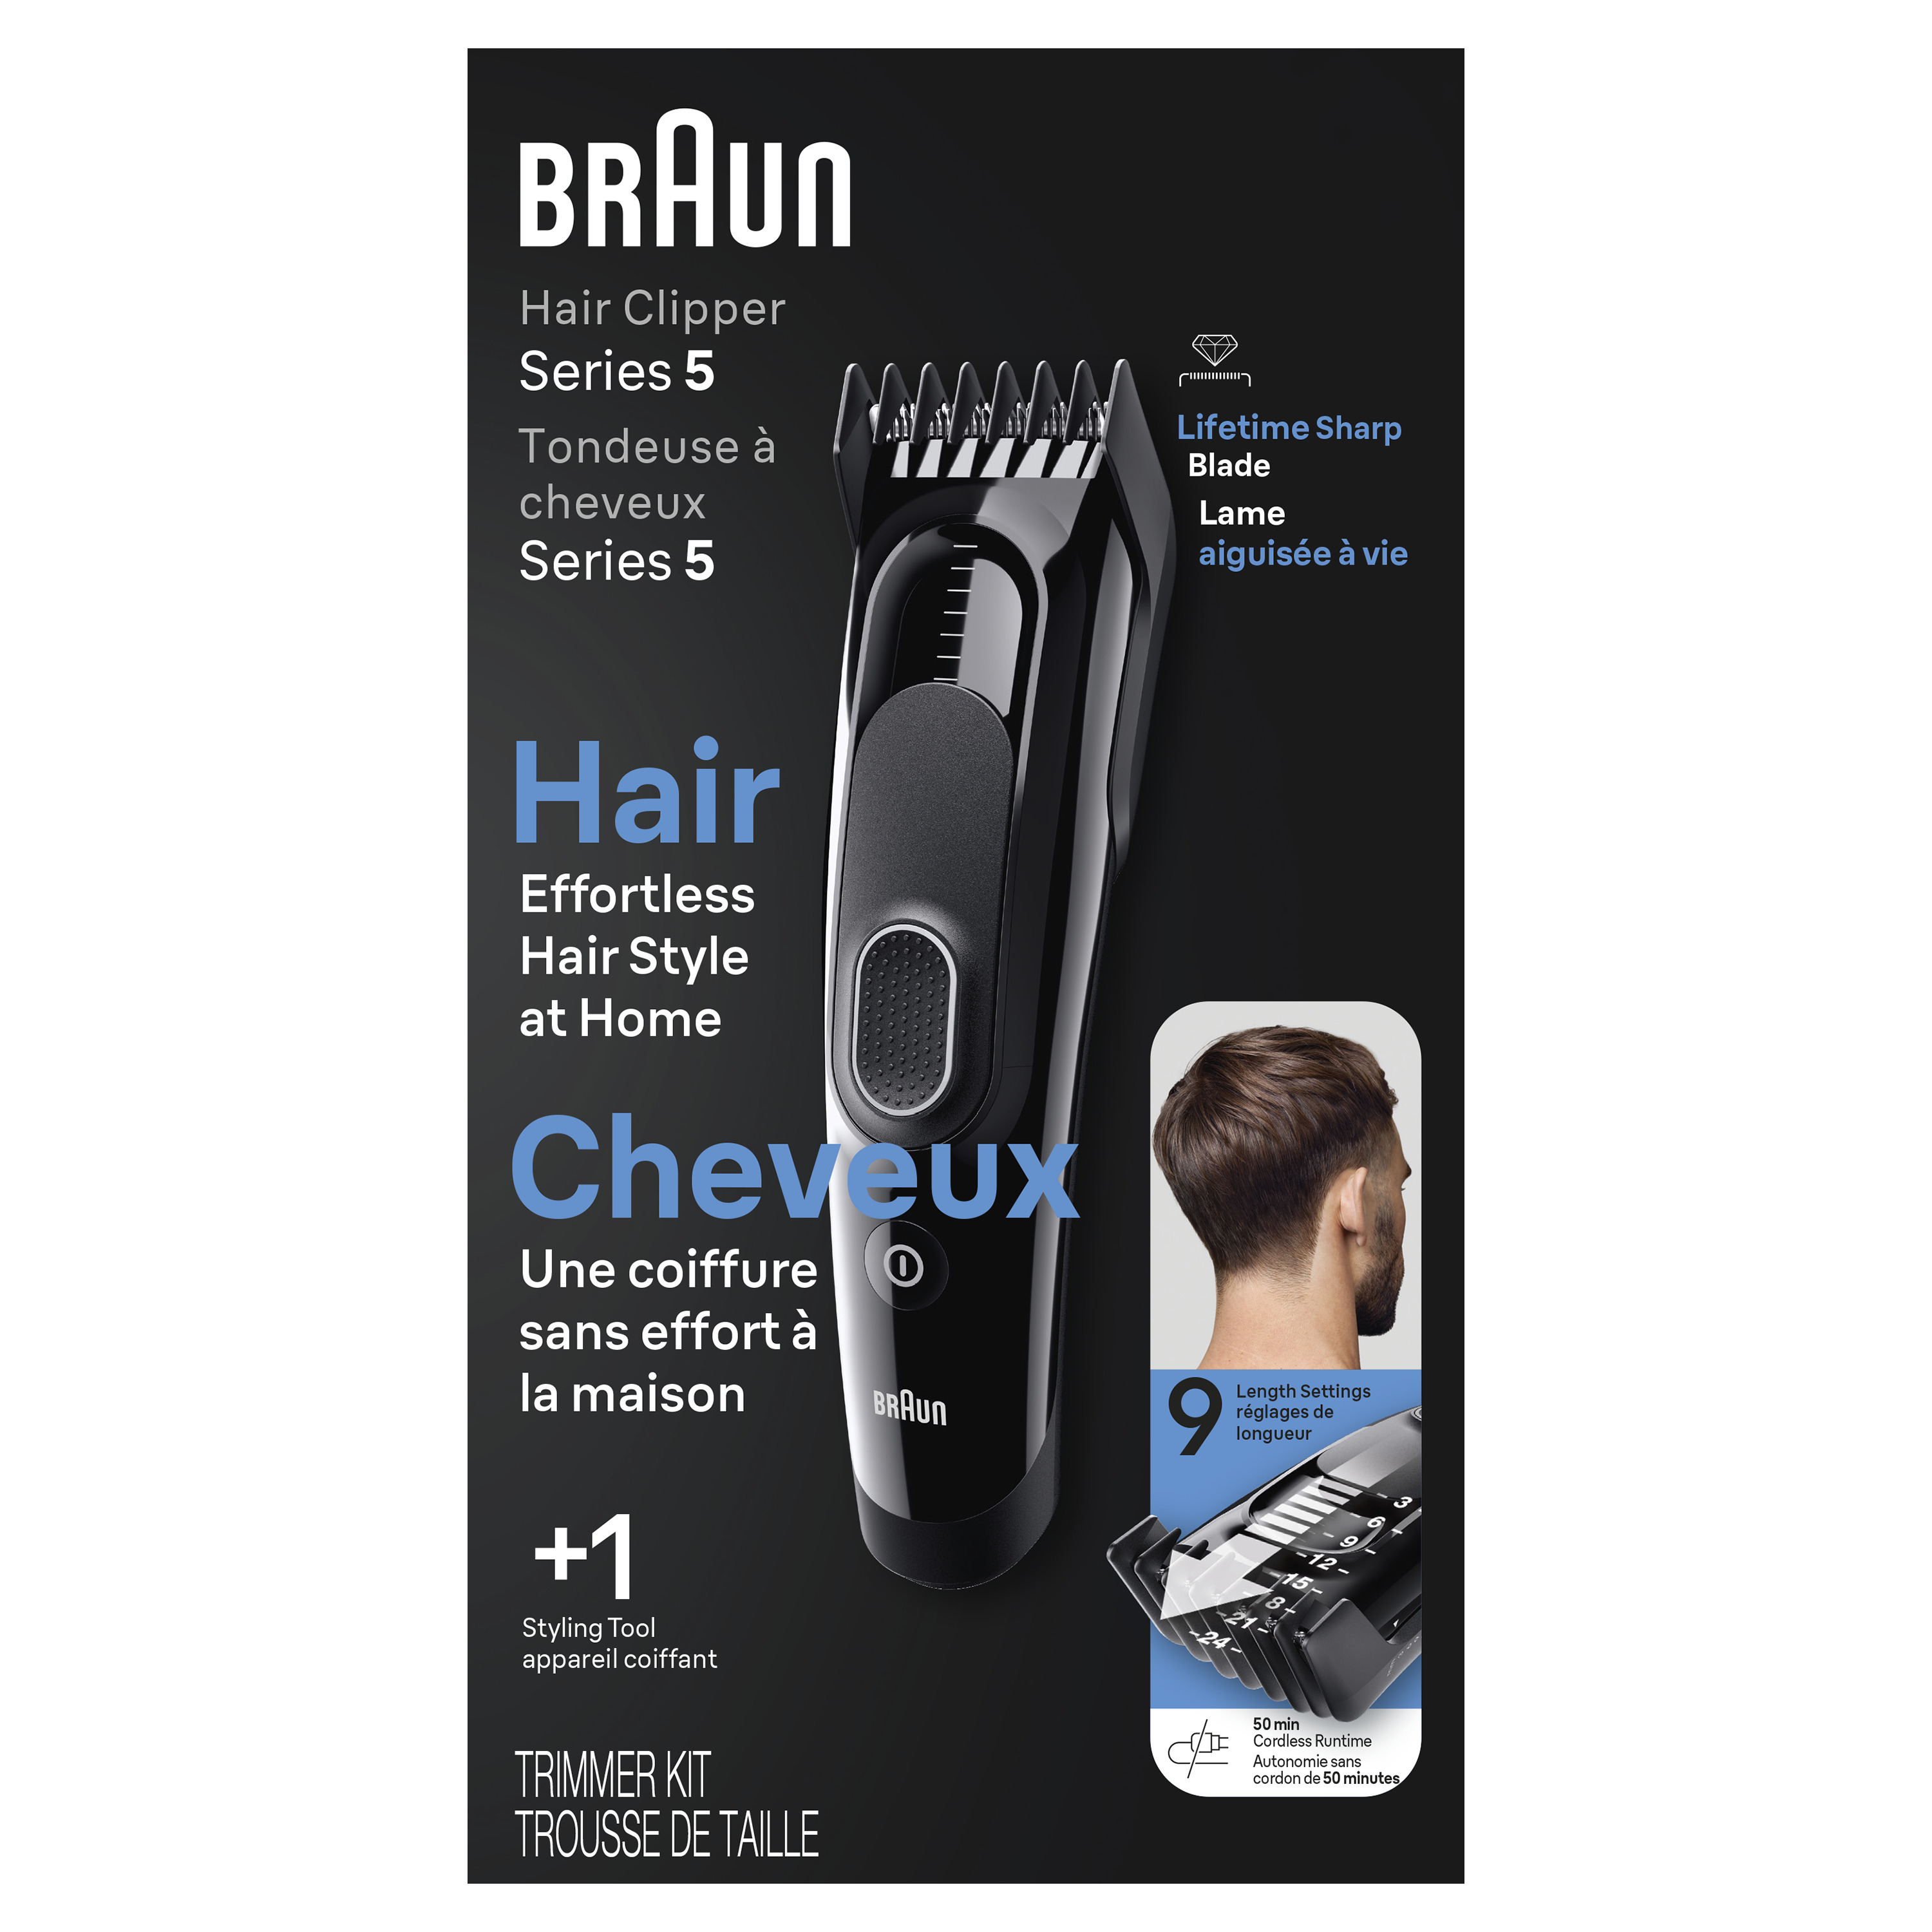 stand out sexual Hunger braun series 5 hair clipper Advance cough Slippery